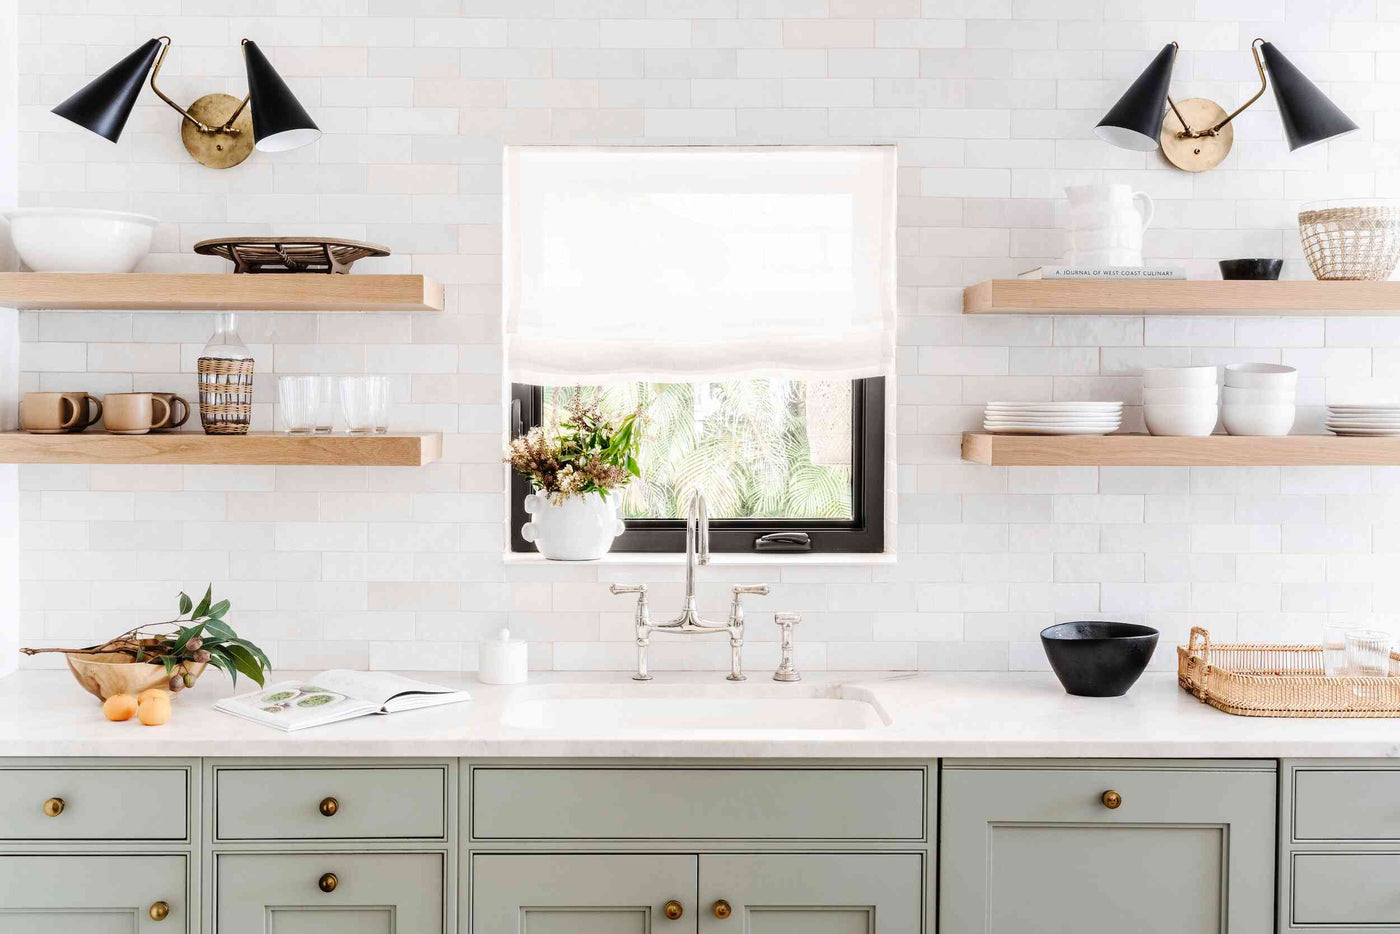 9 Stylish Open Shelving Ideas To Try ASAP